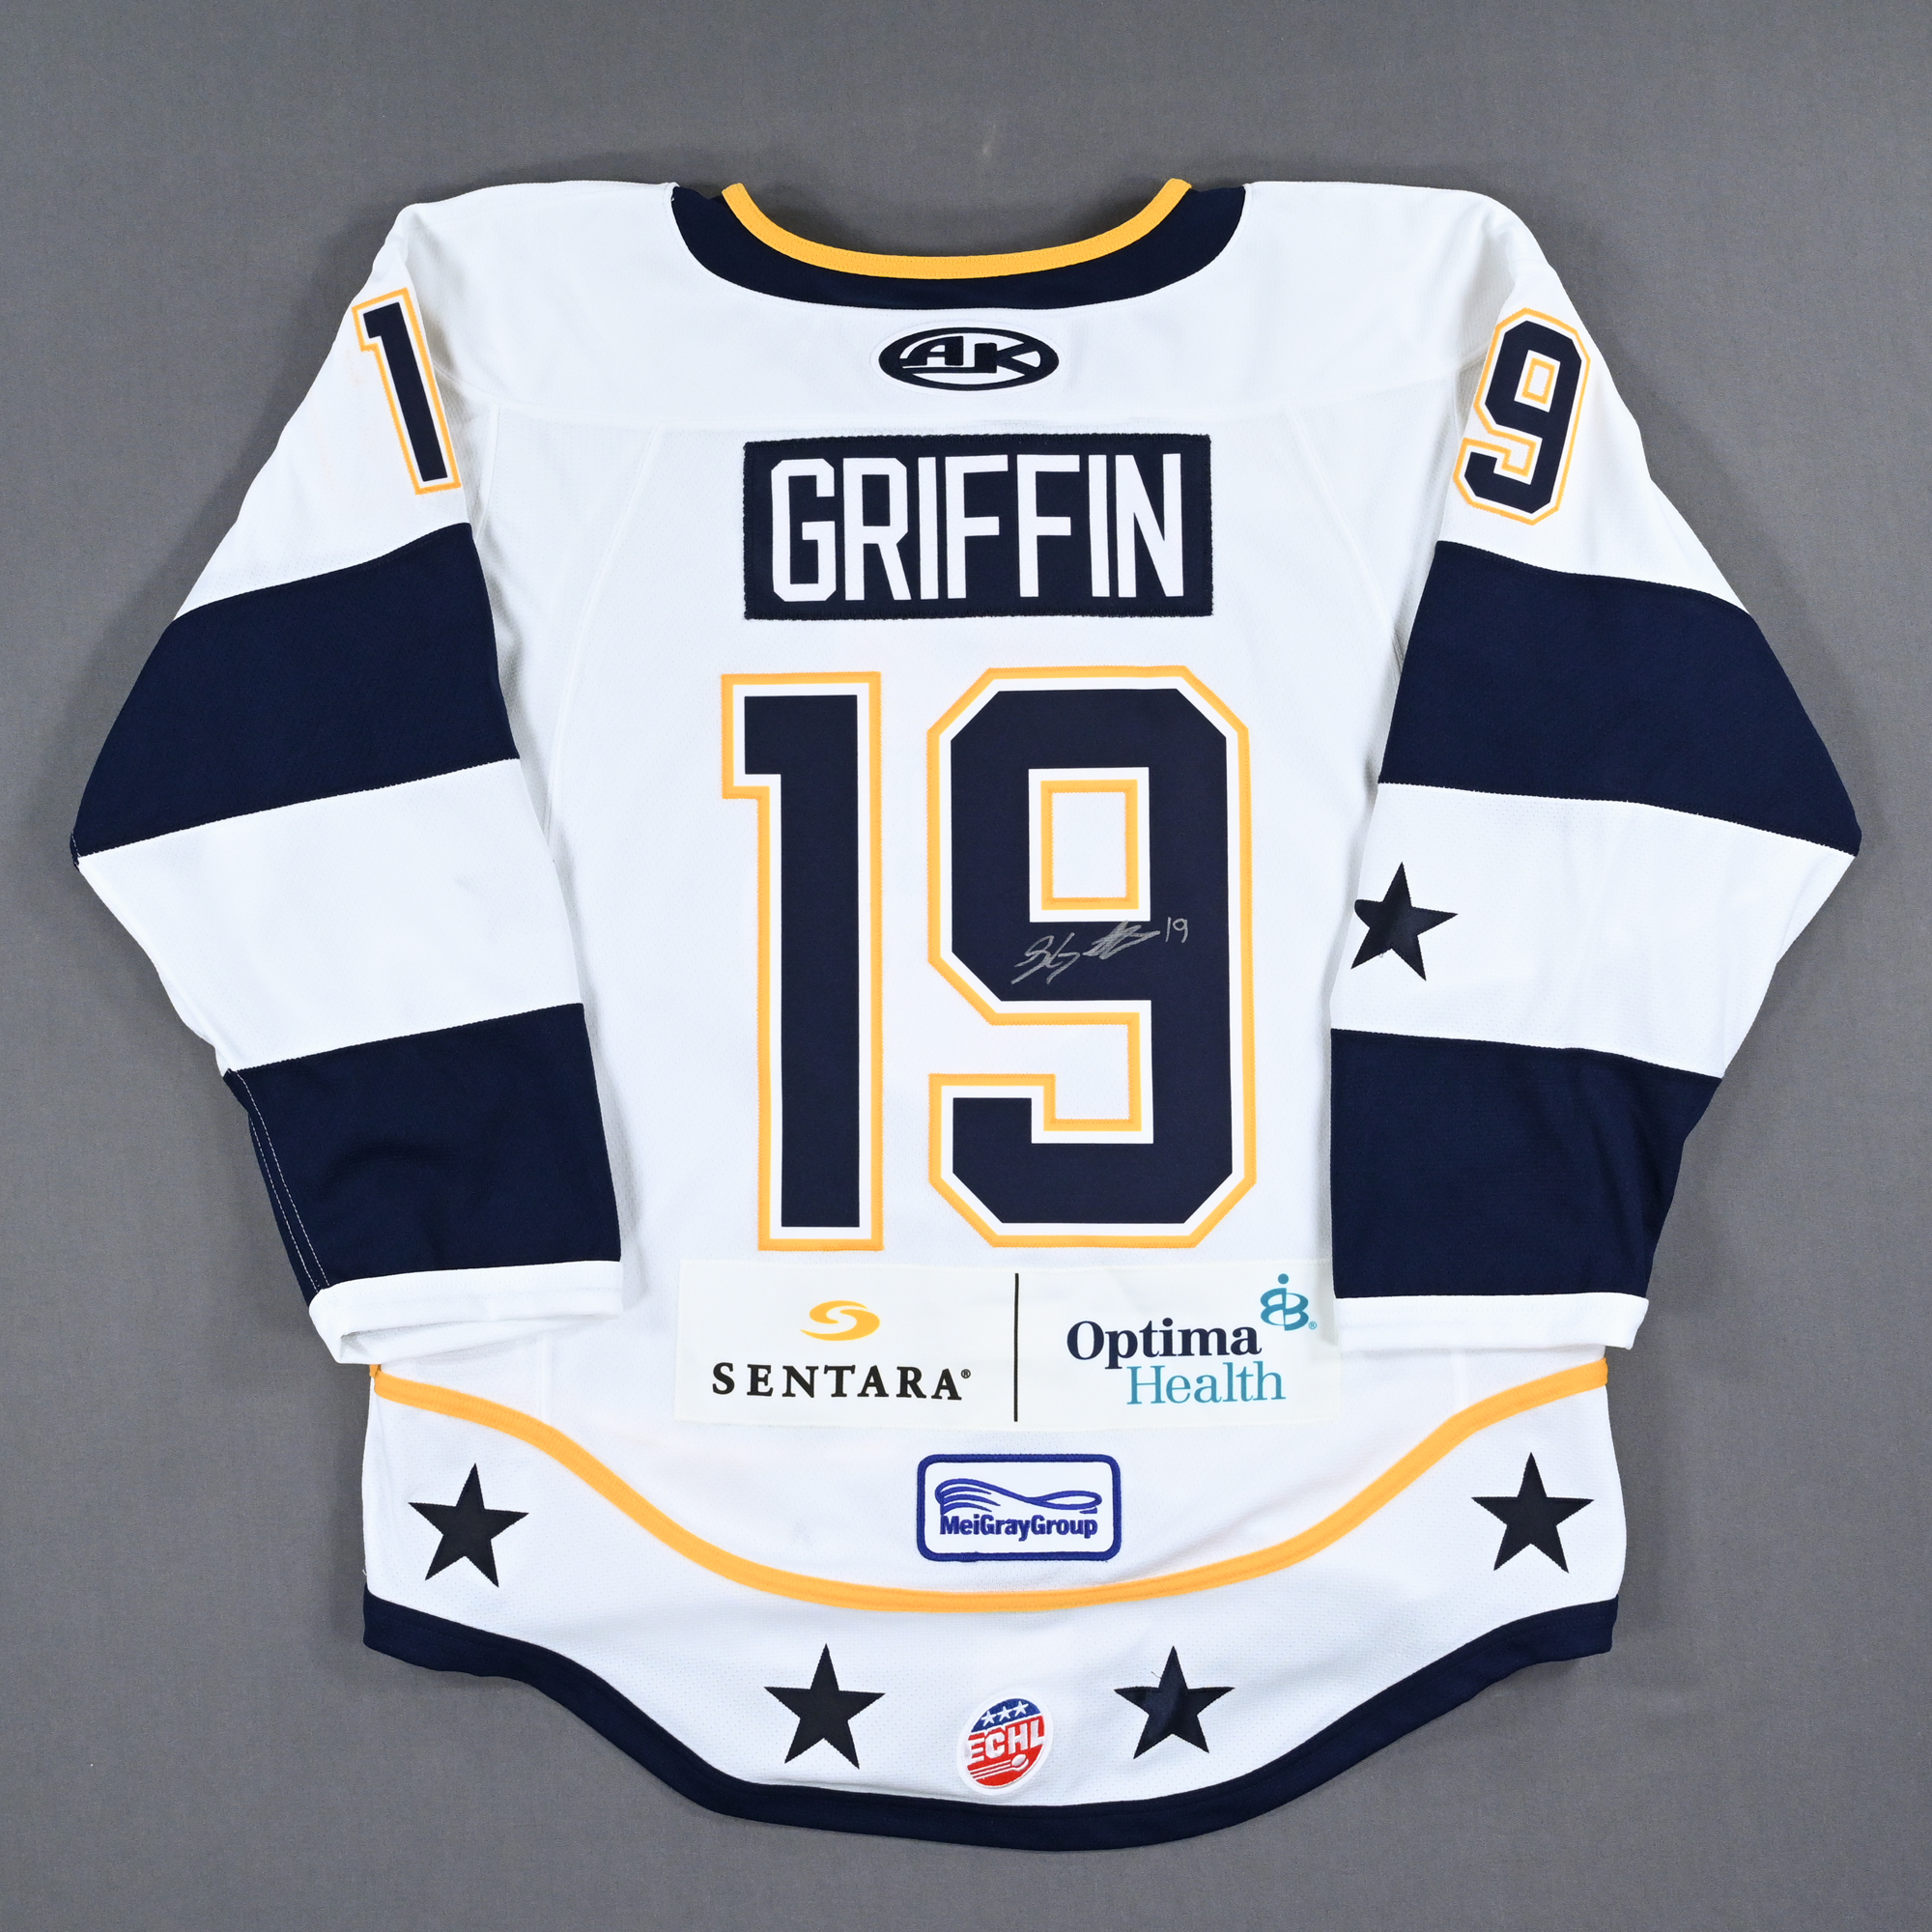 MeiGray to Auction Jerseys, Pucks from ECHL All-Star Game